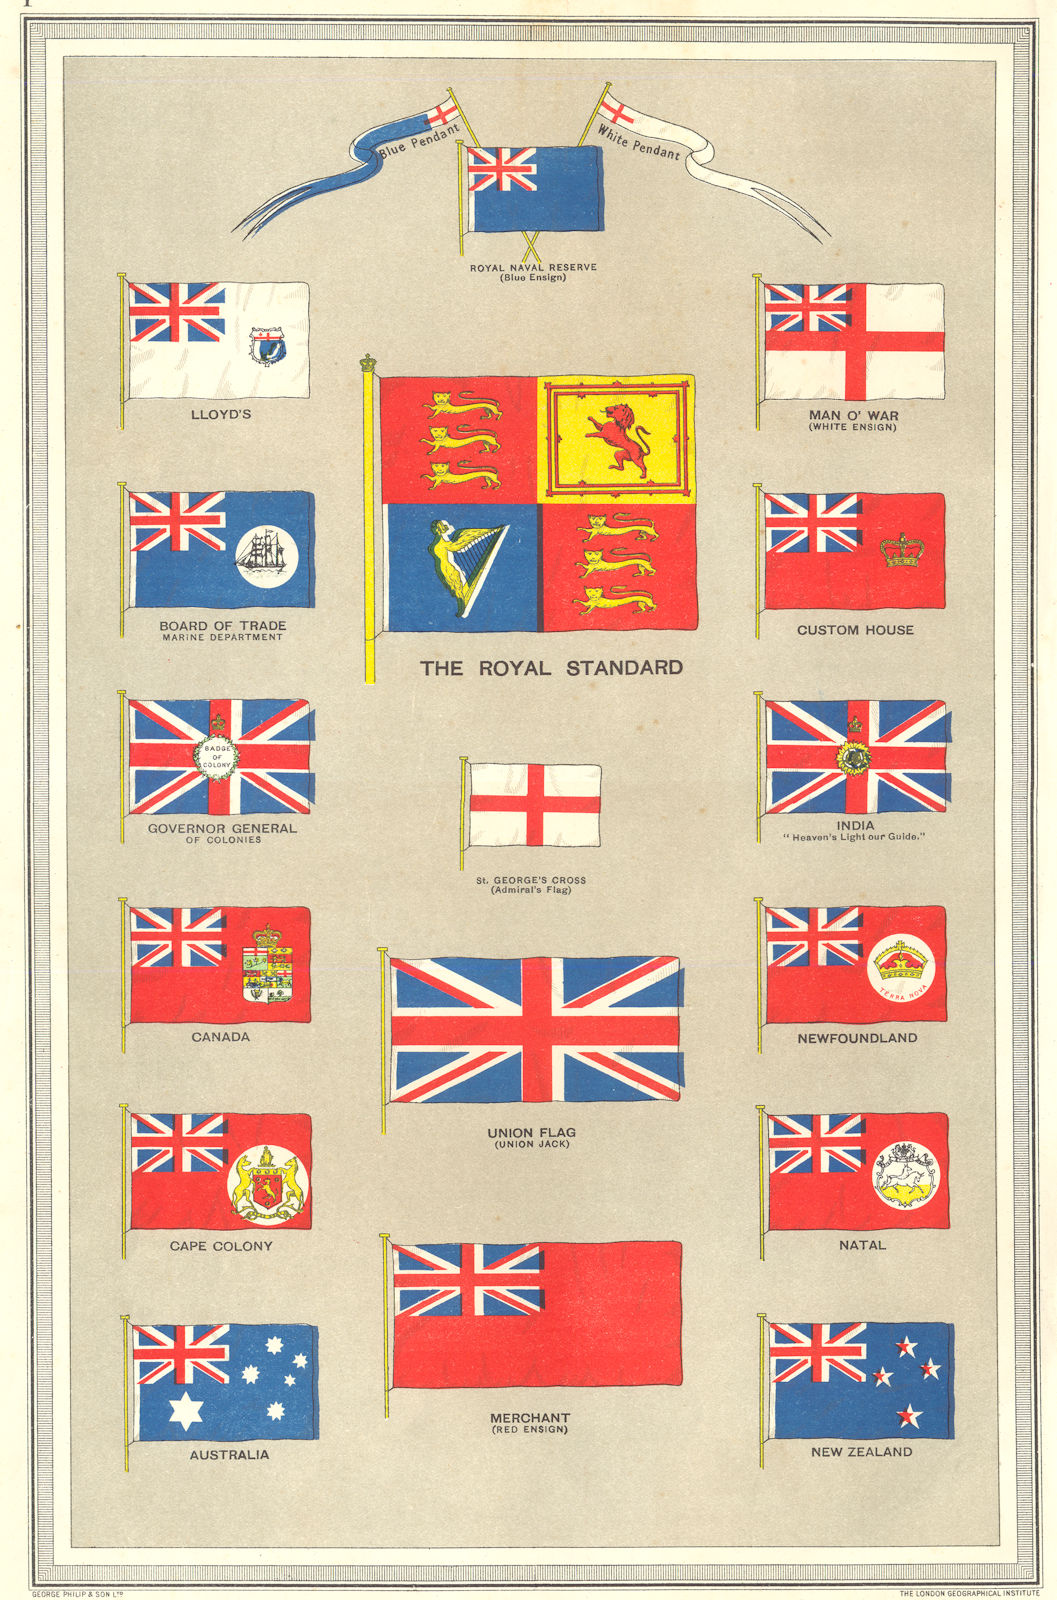 BRITISH EMPIRE FLAGS. Union Jack Red White Ensign Lloyd's Royal Standard 1907